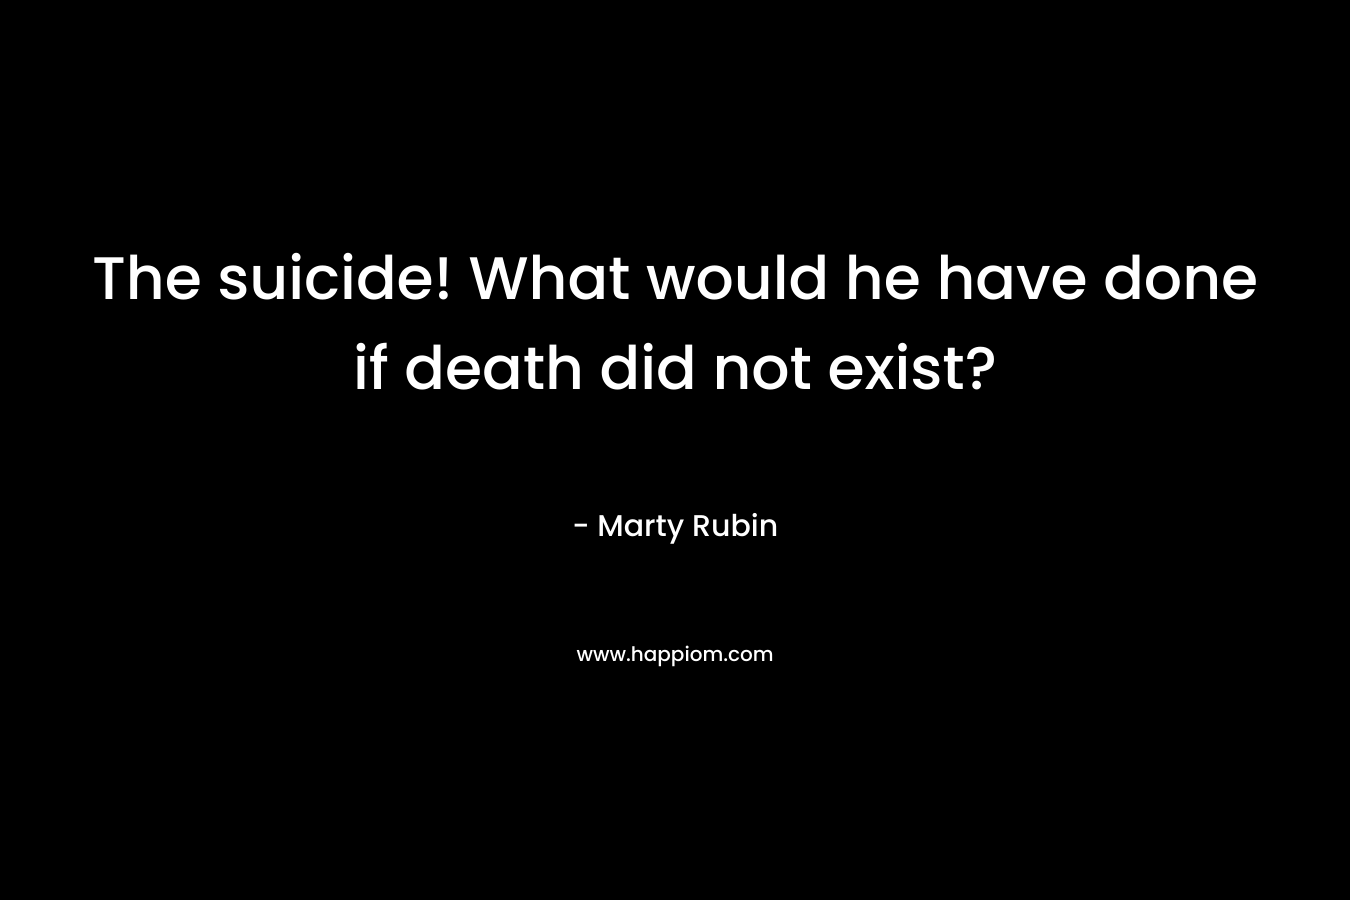 The suicide! What would he have done if death did not exist?